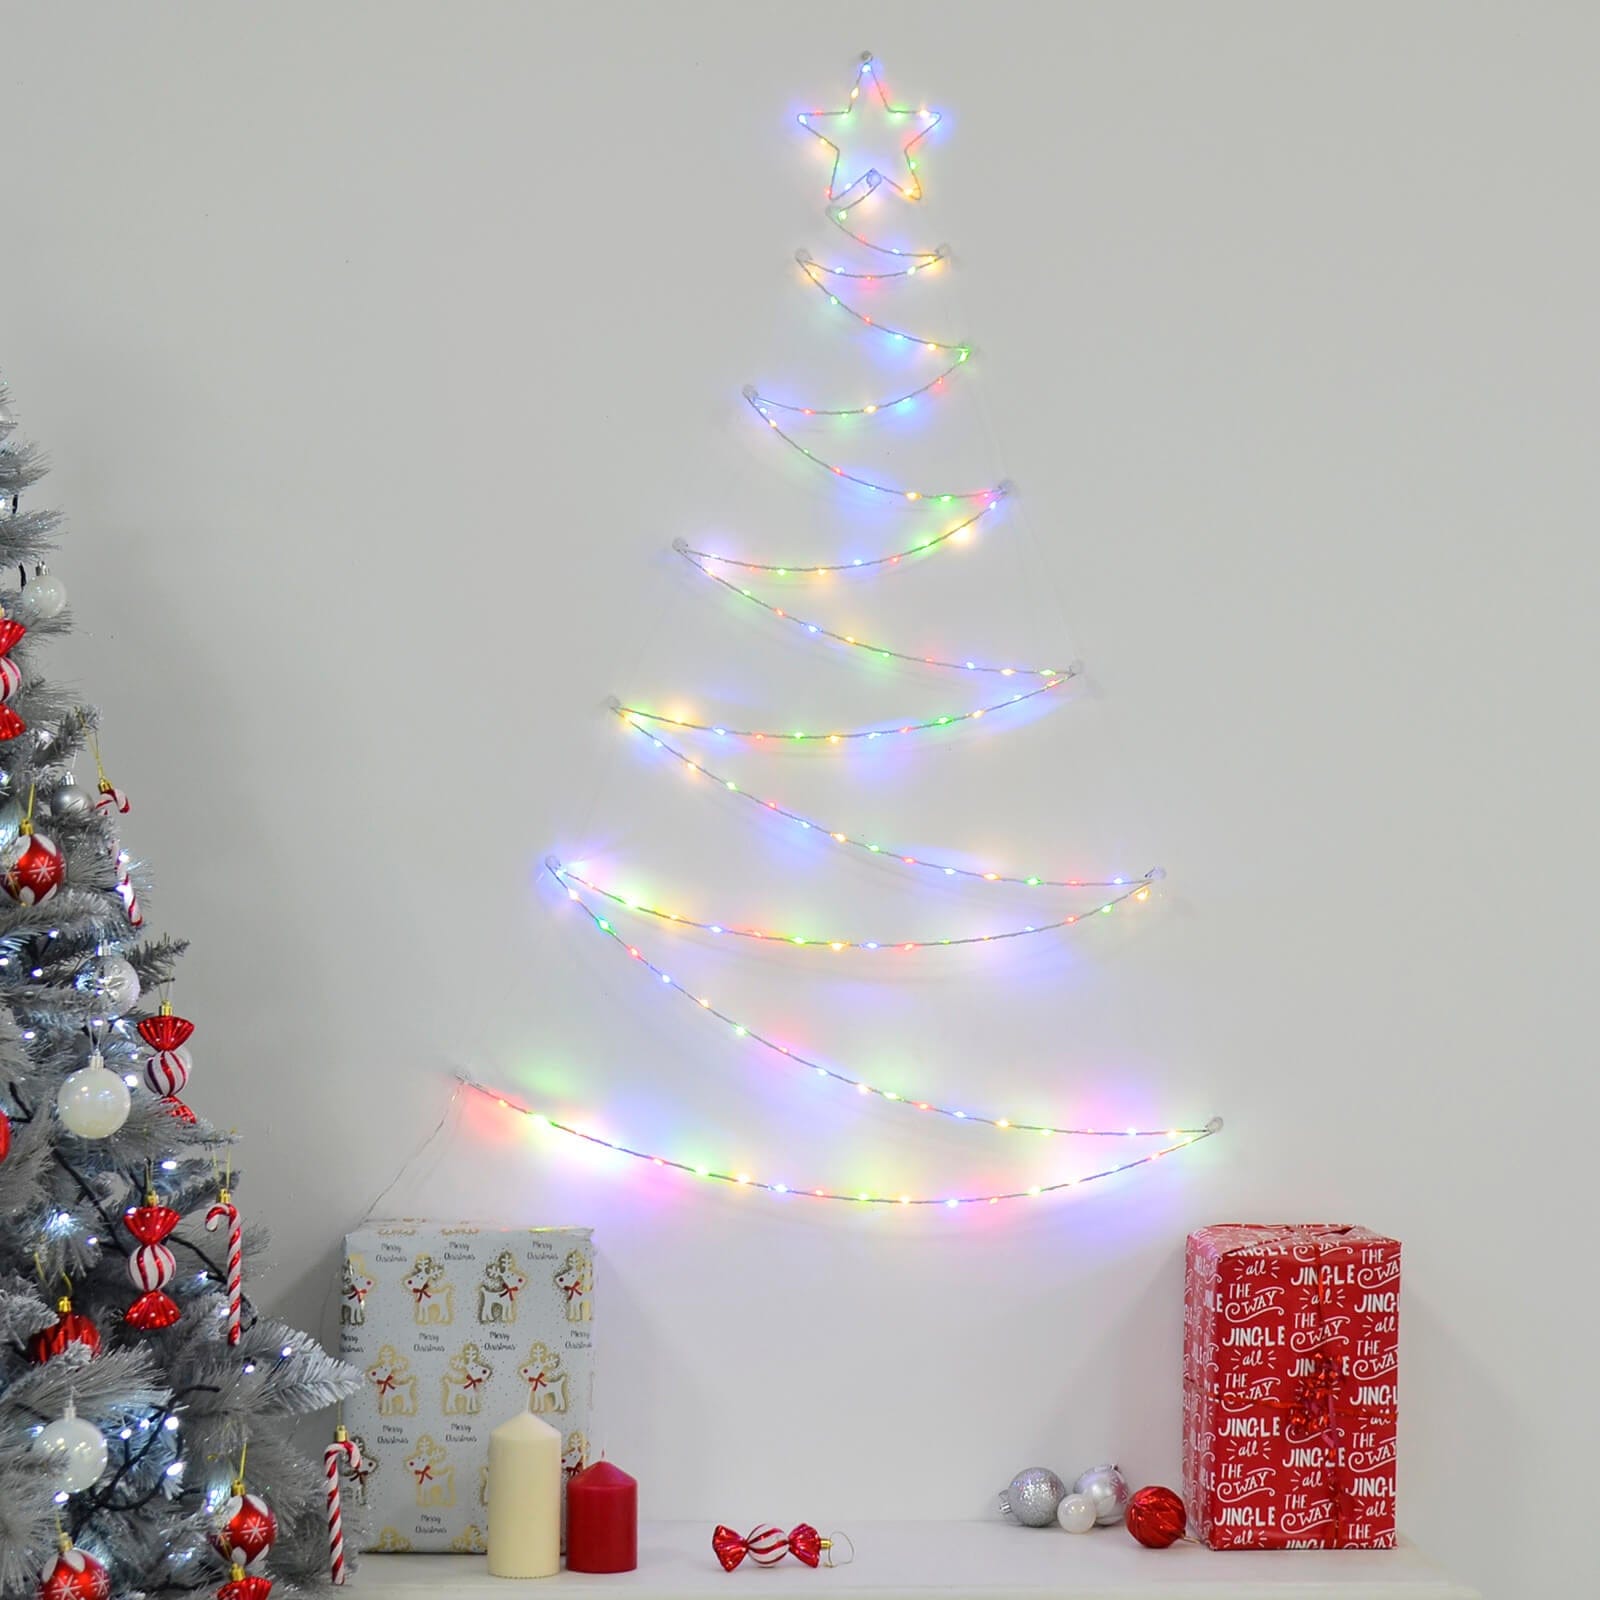 Light up Christmas tree shape festive wall hanging decoration with multicoloured LED lights beside a silver Christmas tree with red baubles, above a table with presents, candles and decorations